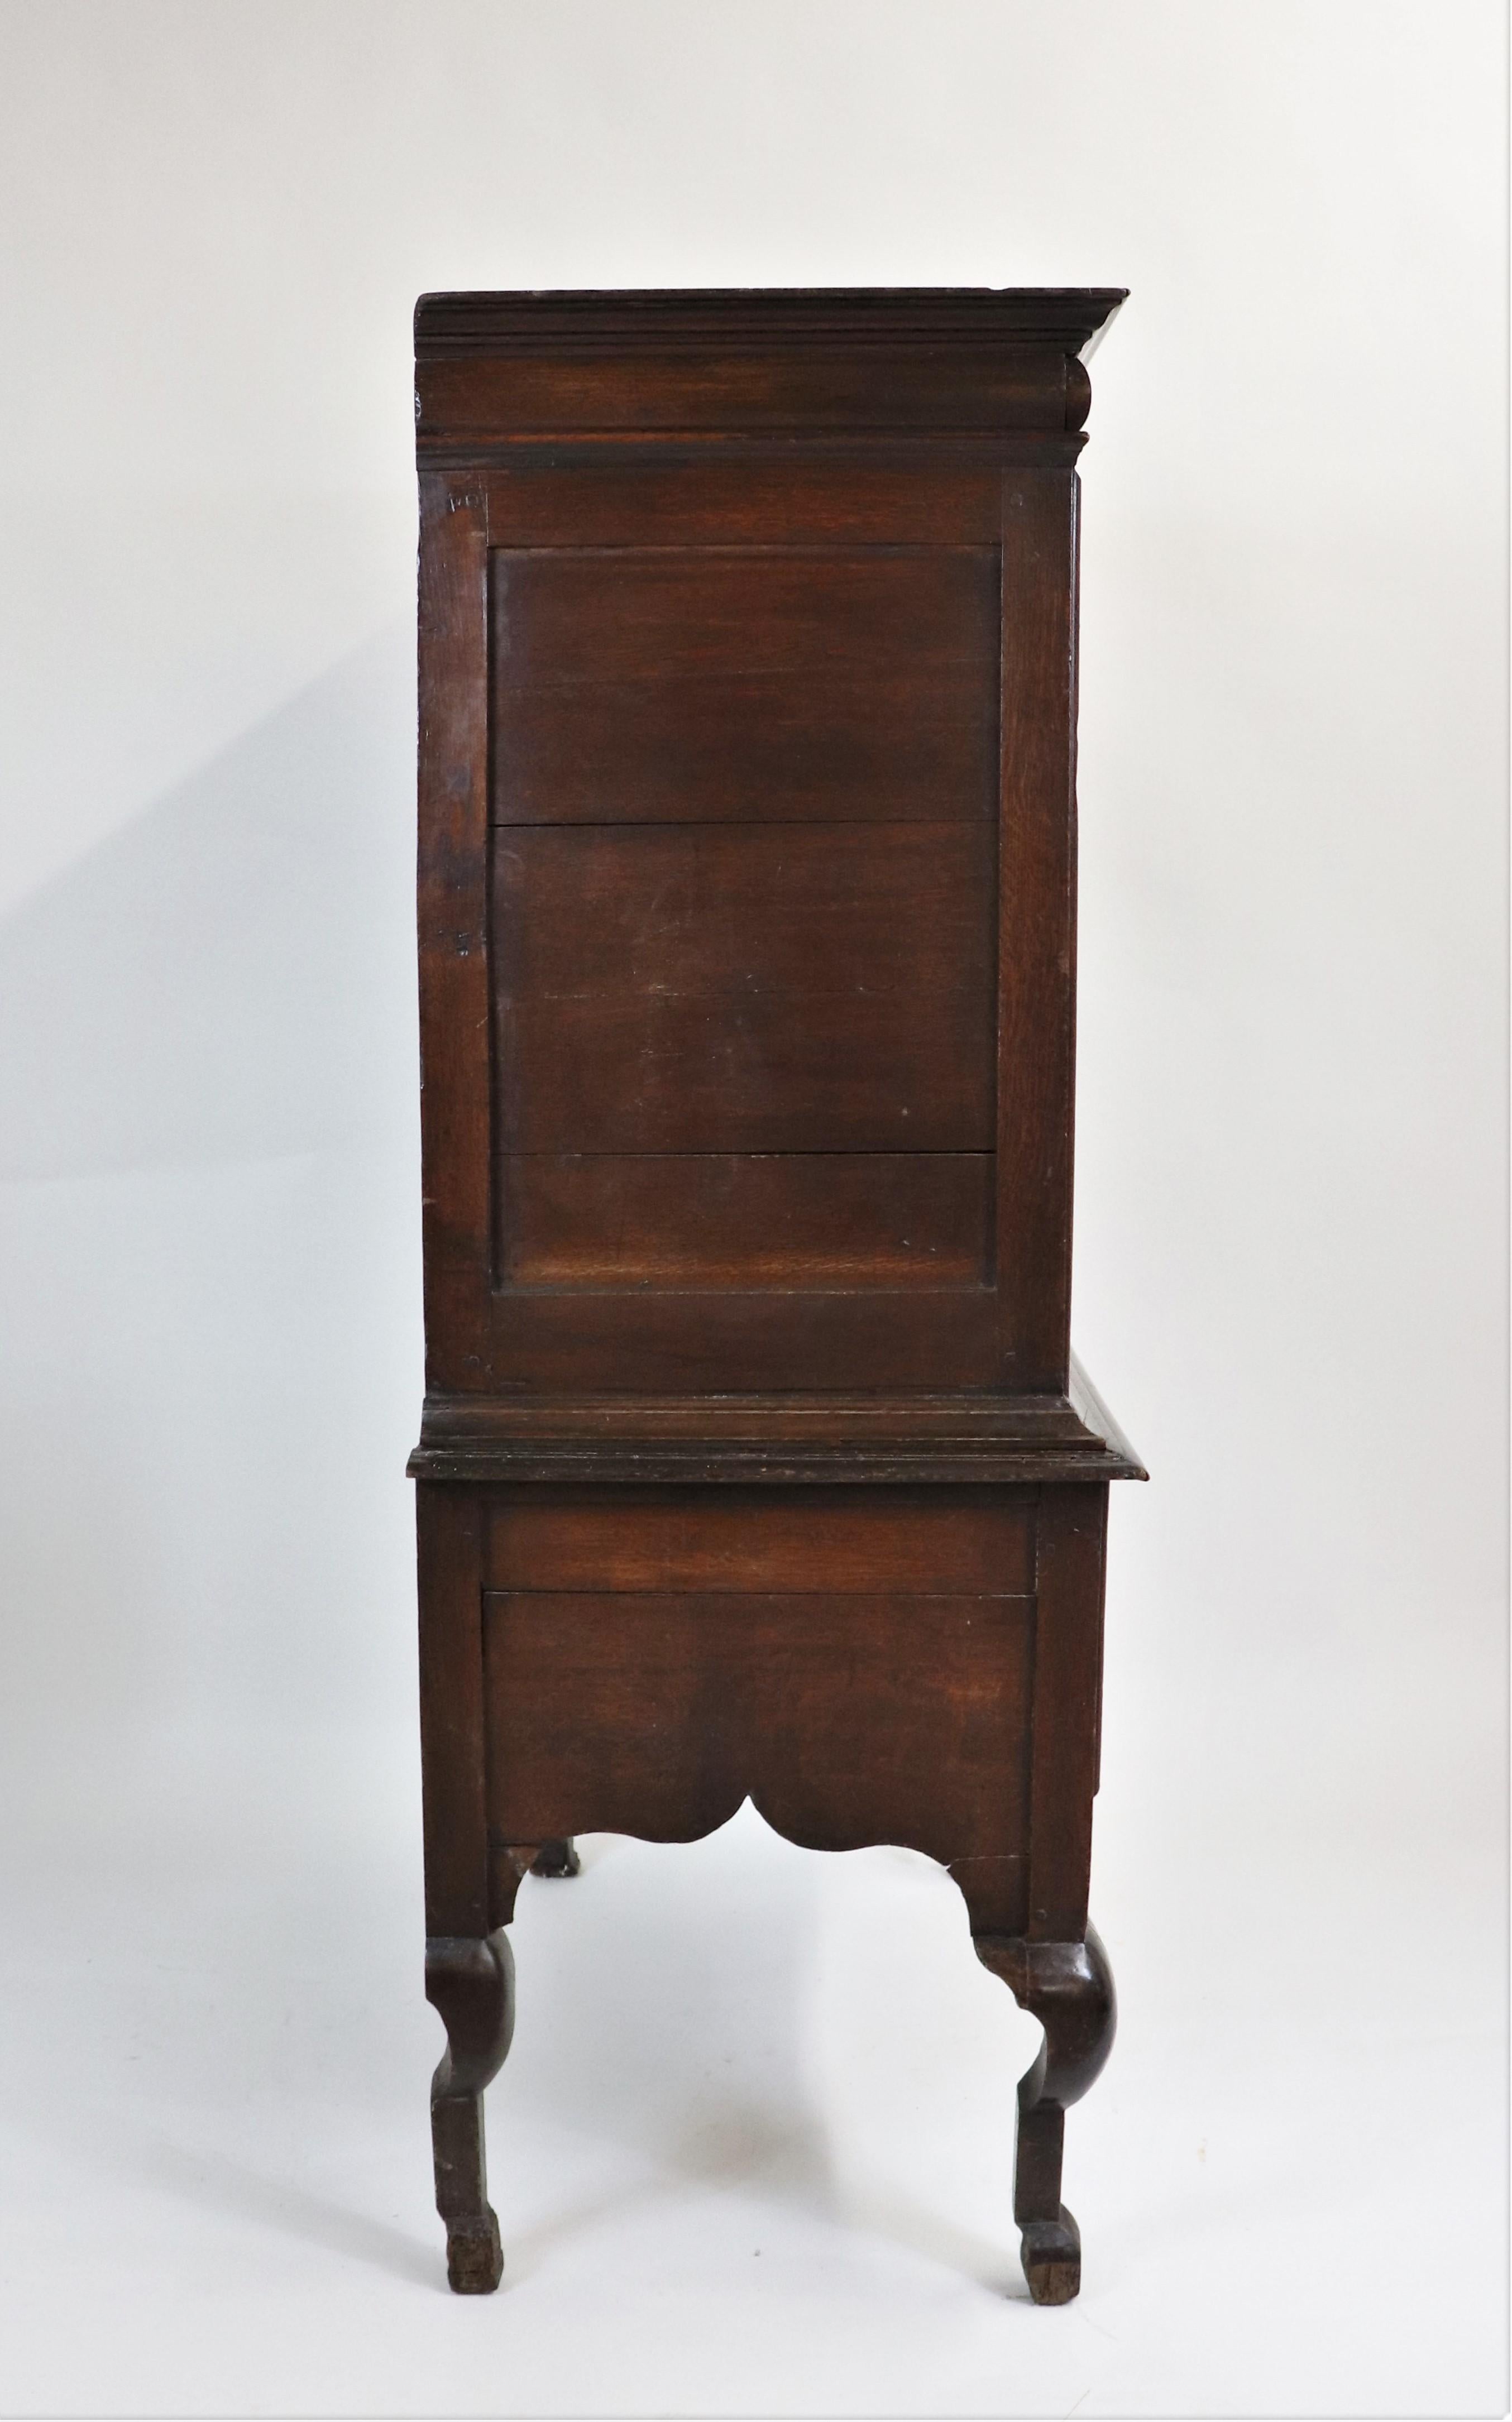 The Charles II period design incorporated a French influence. Furniture was often characterized by elegant carvings with a focus on reliability and usefulness. This dresser has been carved entirely from oak. Oak is a desirable hardwood that is dense